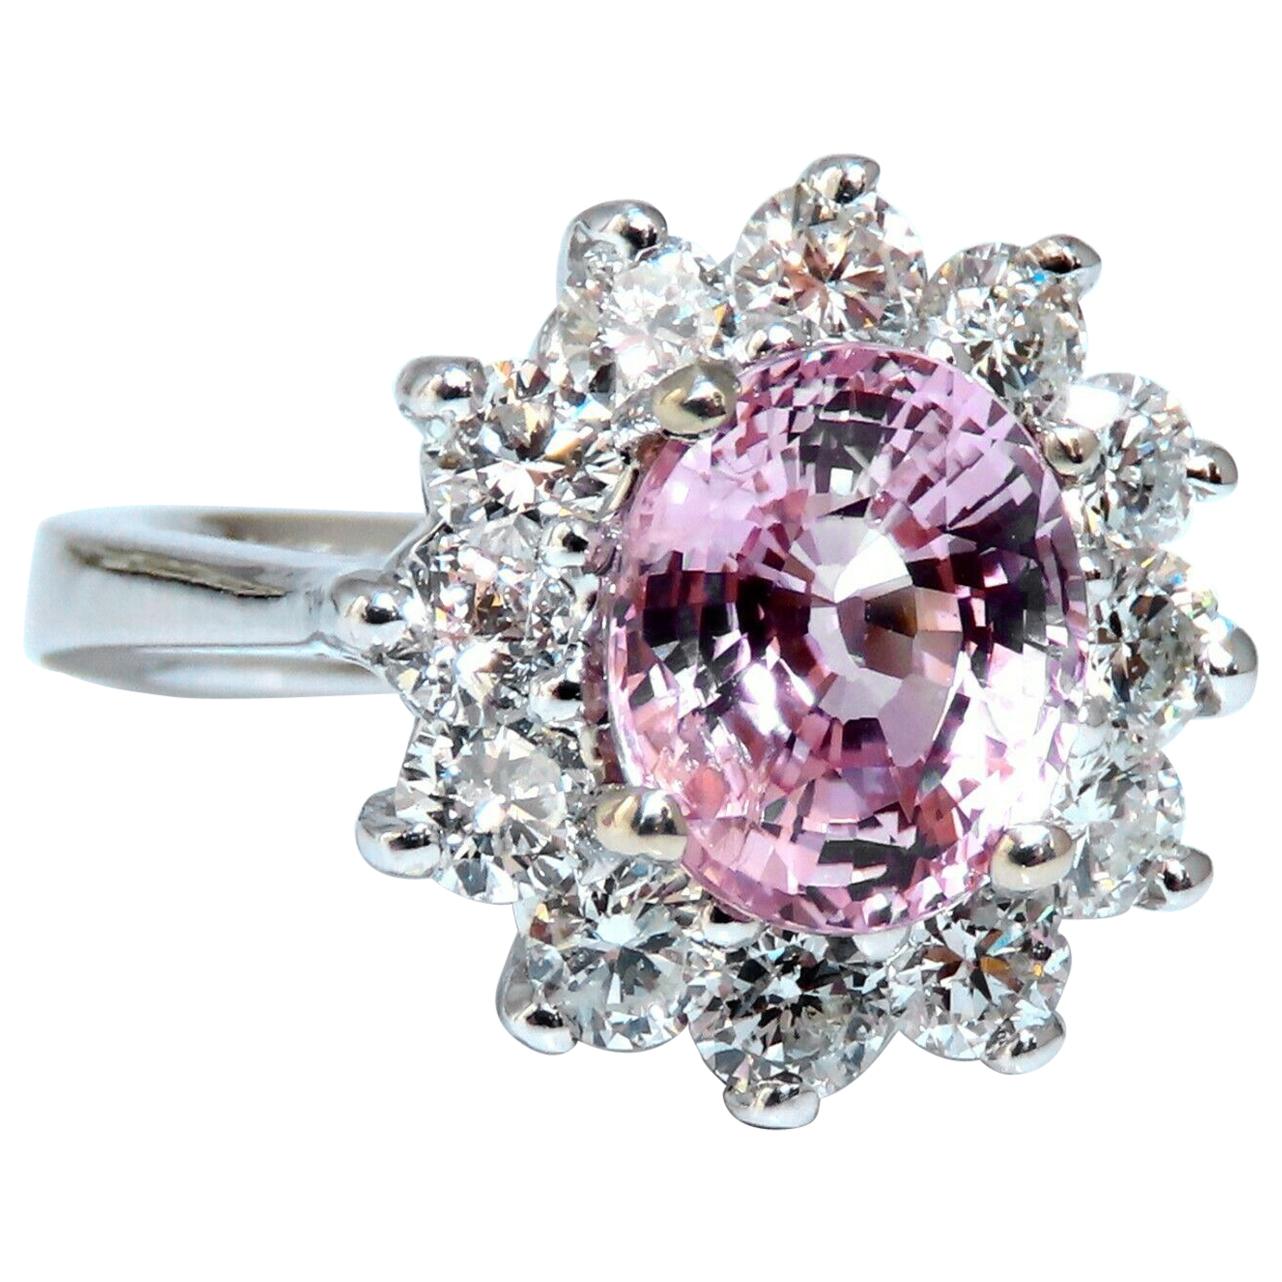 GIA Certified 3.58 Carat Natural Padparadscha Pink Sapphire Diamond Ring Fine